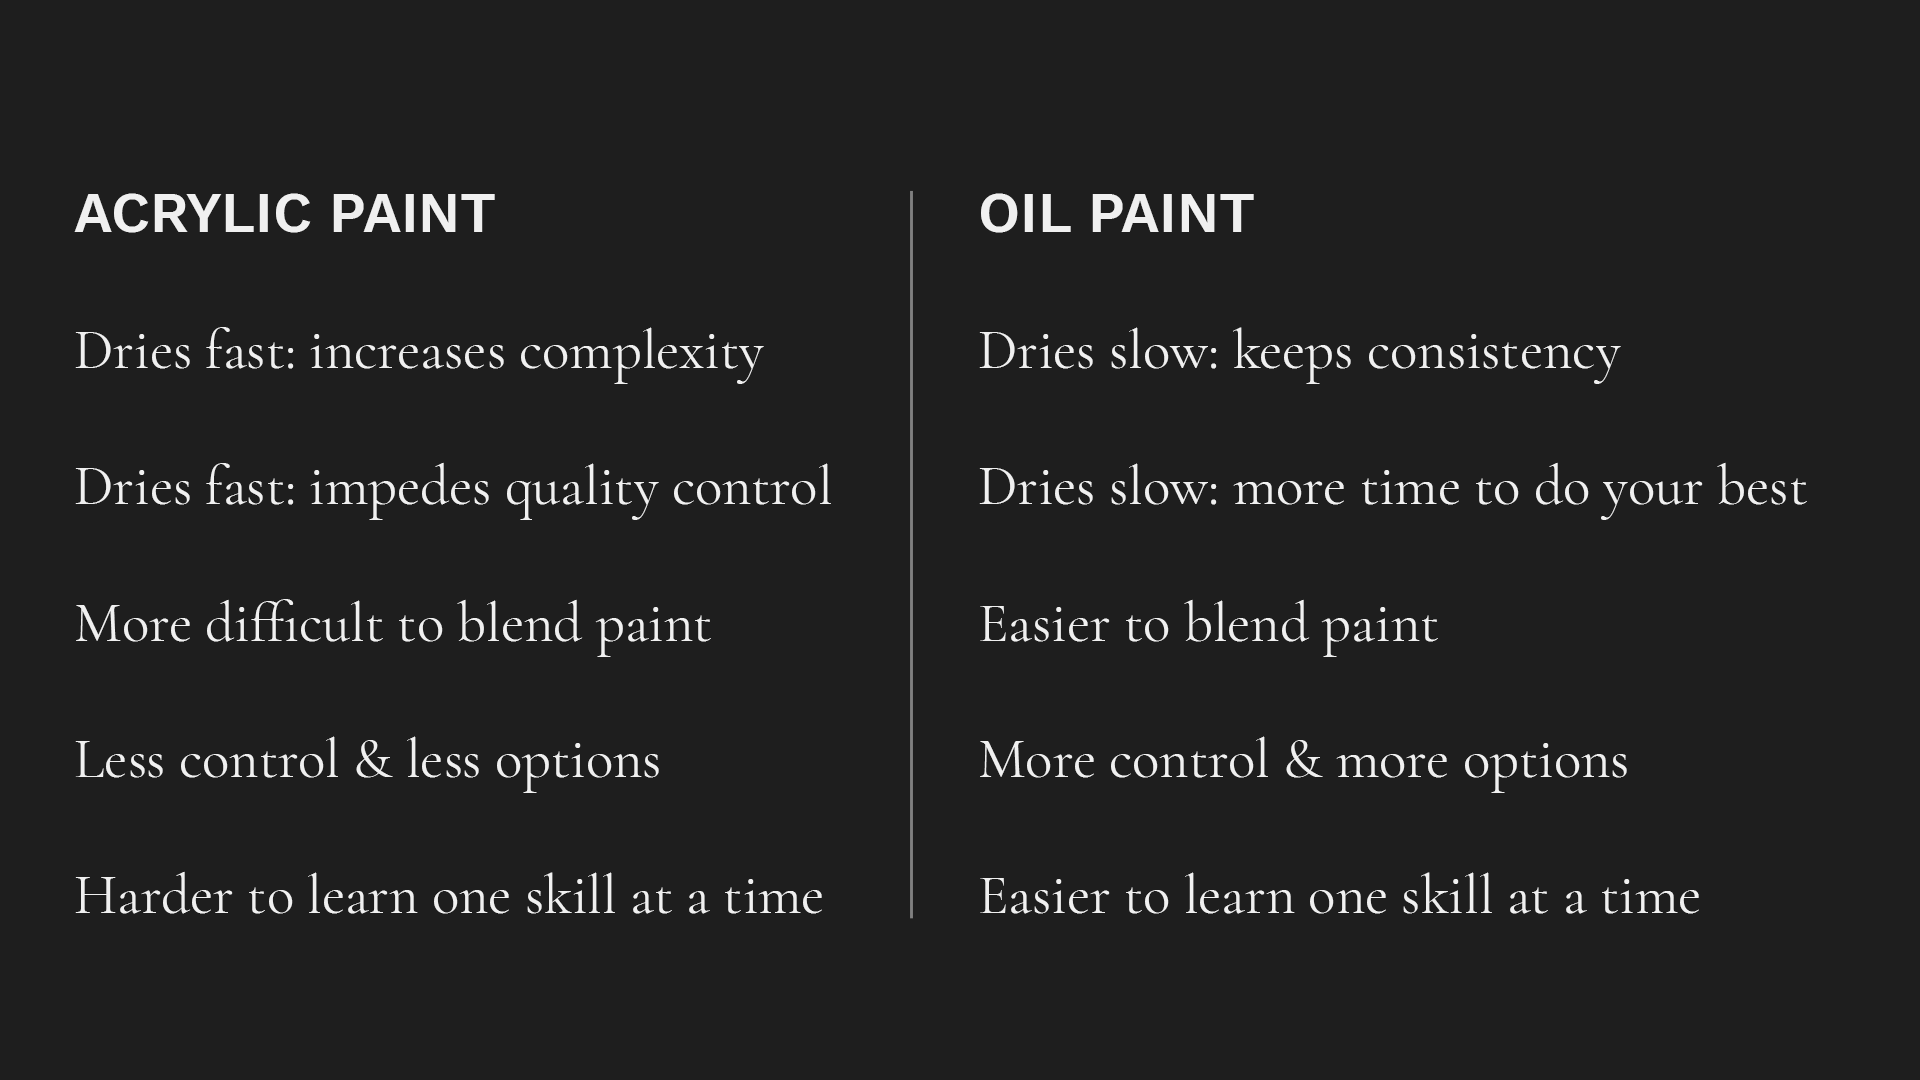 These technical points explain why oil paint is the best to choose when you’re learning how to paint.